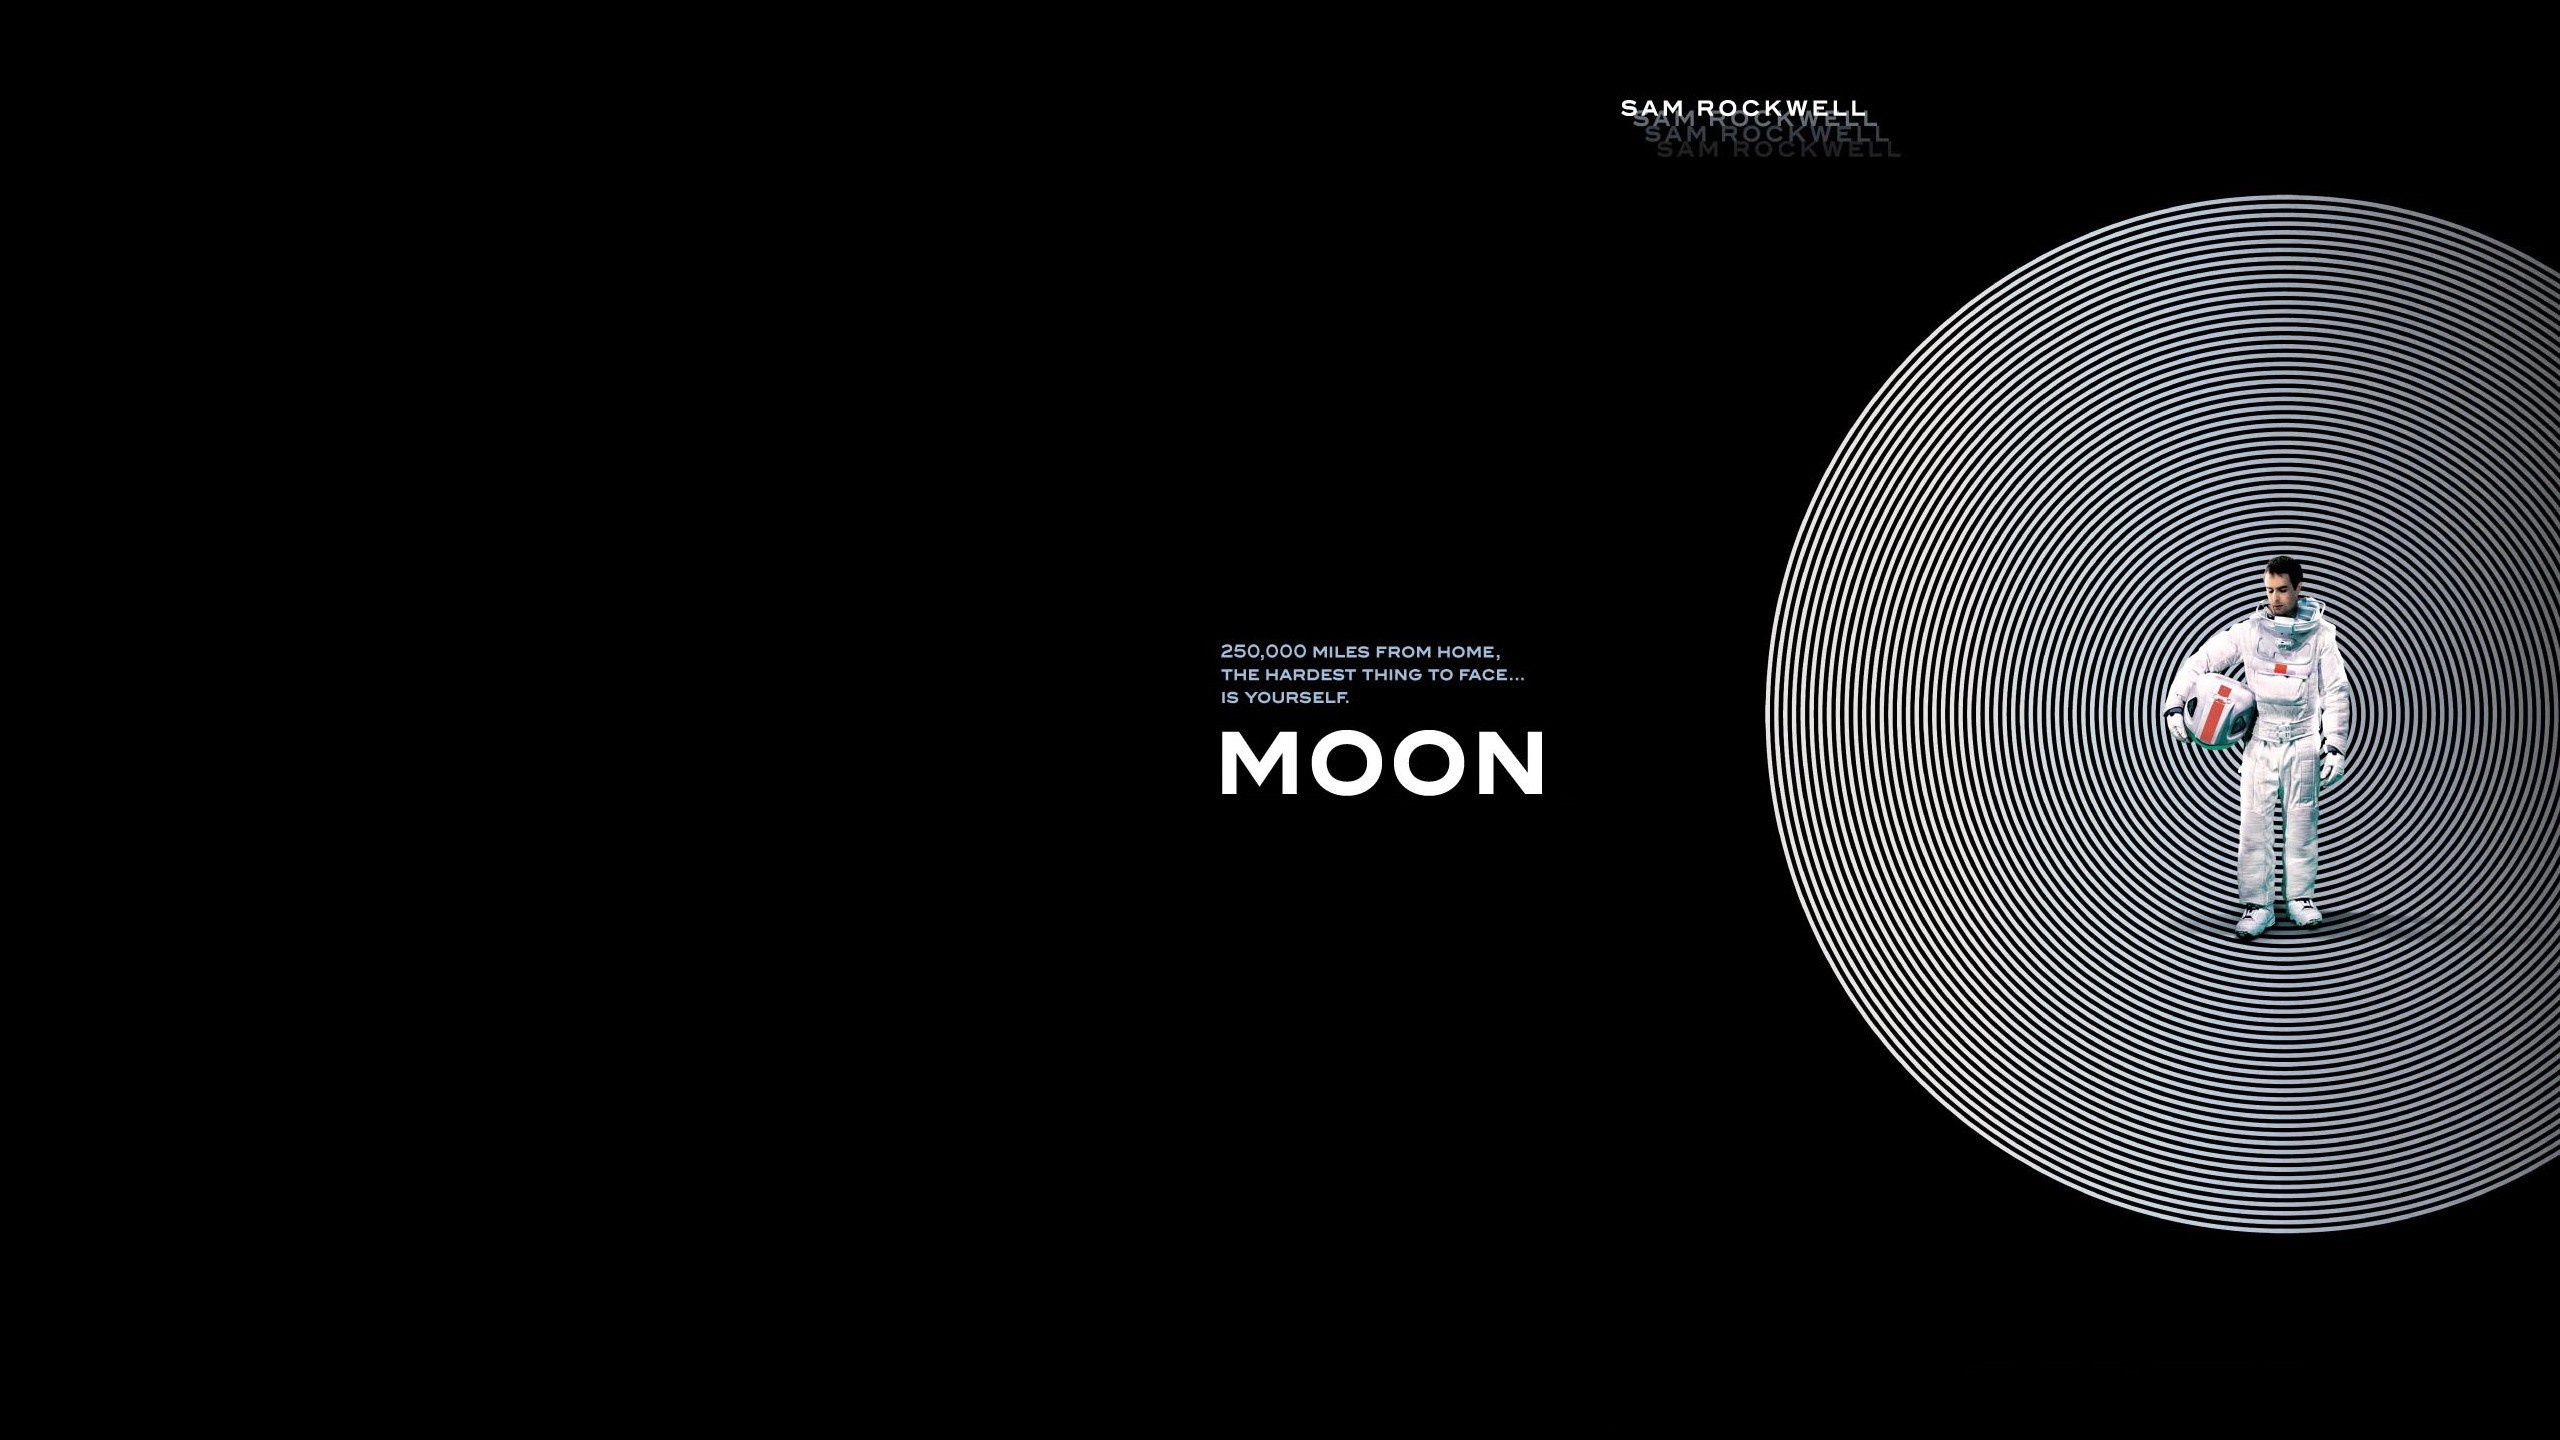 Moon (Movie): A 2009 science fiction drama film directed by Duncan Jones, Sam Rockwell. 2560x1440 HD Background.